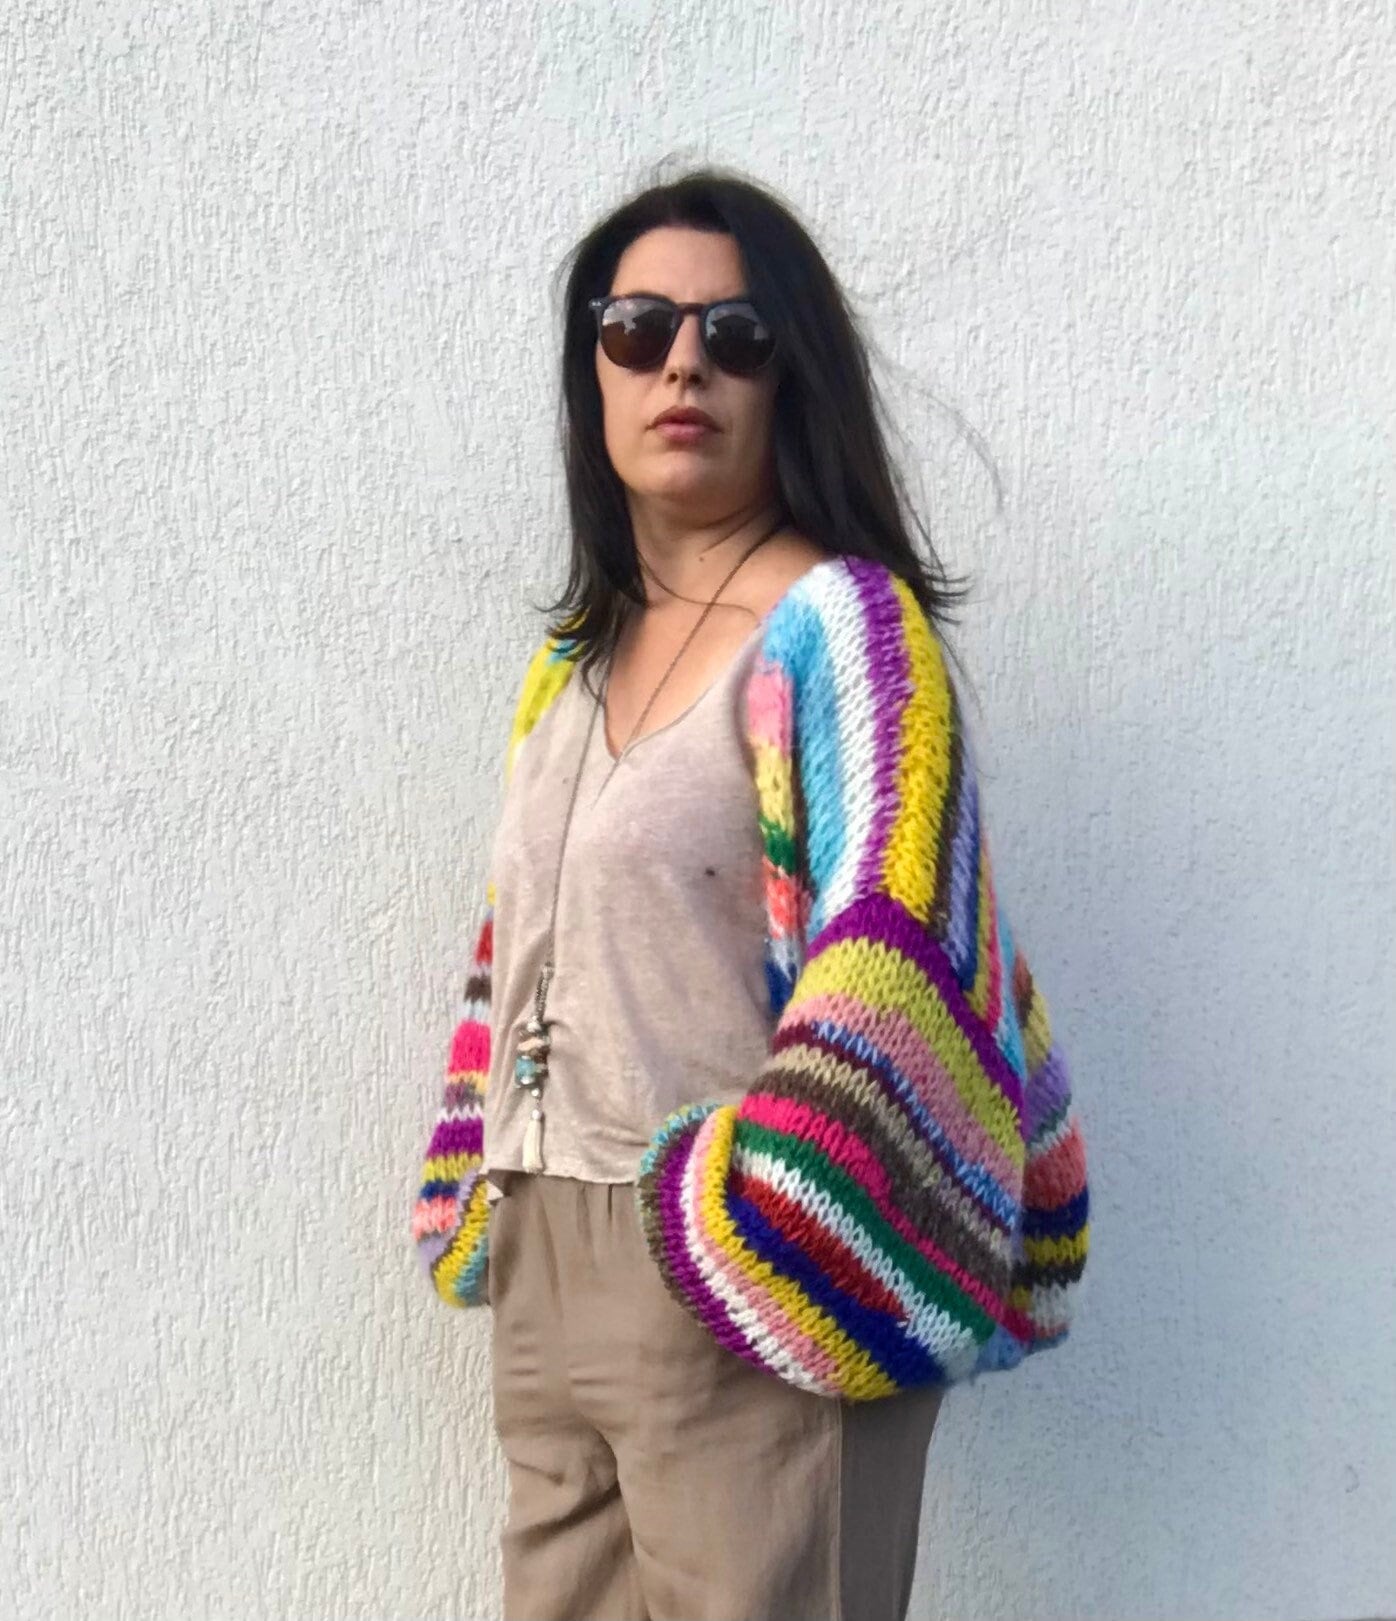 JOY Oversized Rainbow Cardigan, Hand Knit Jumper, Hand Knit Chunky Cardigan with Balloon Sleeves, Multicolor Sweater, Striped Cardigan